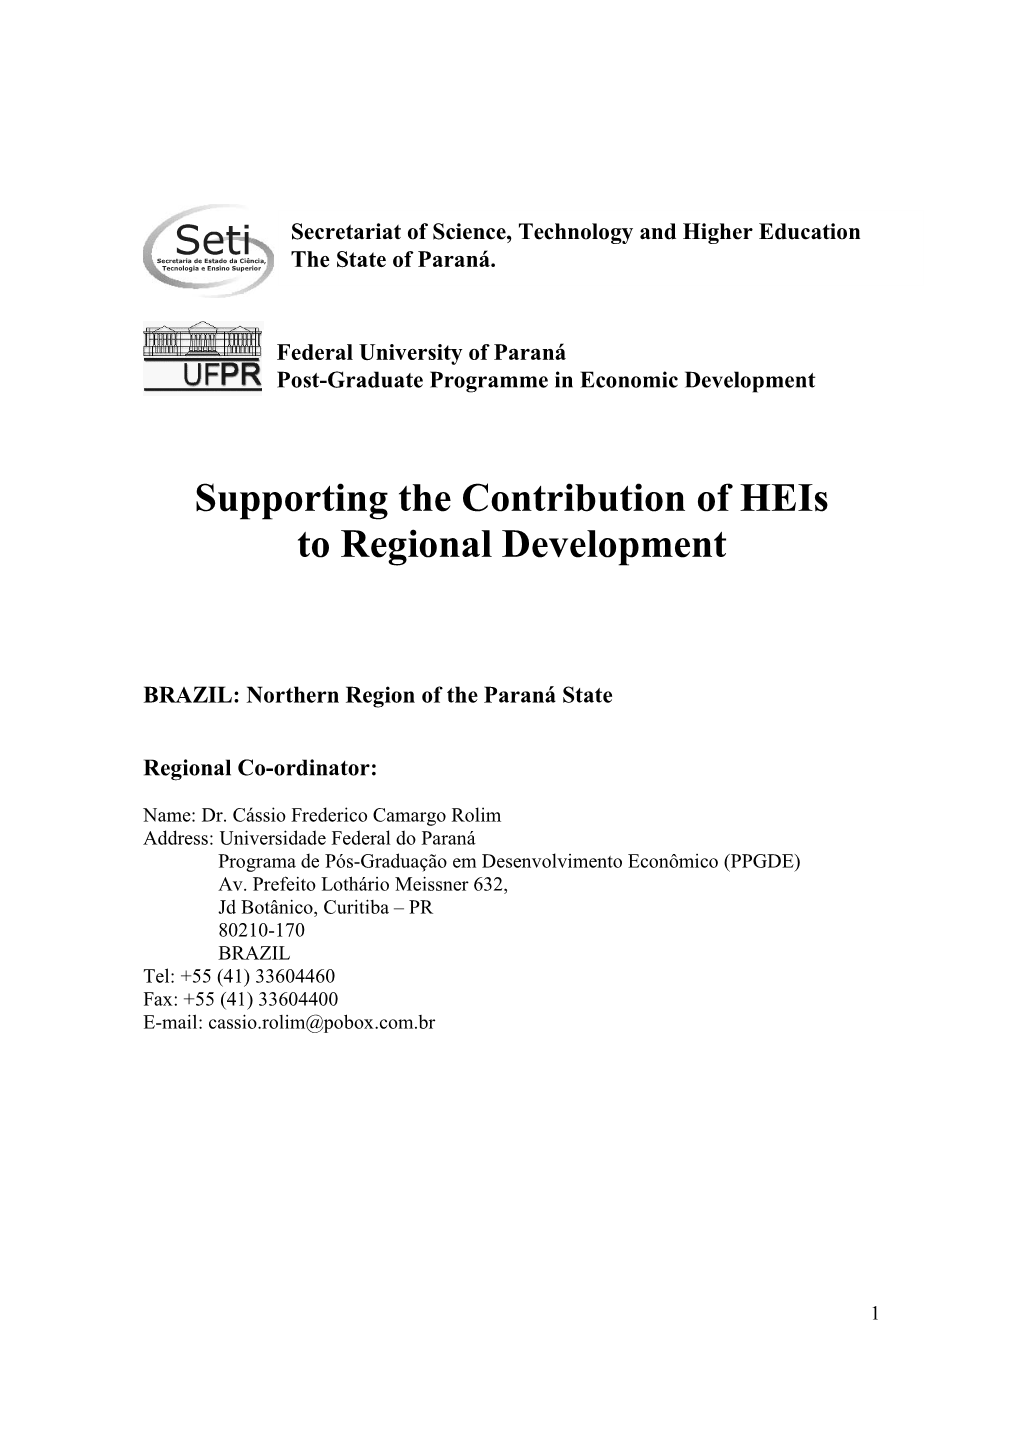 Supporting the Contribution of Heis to Regional Development